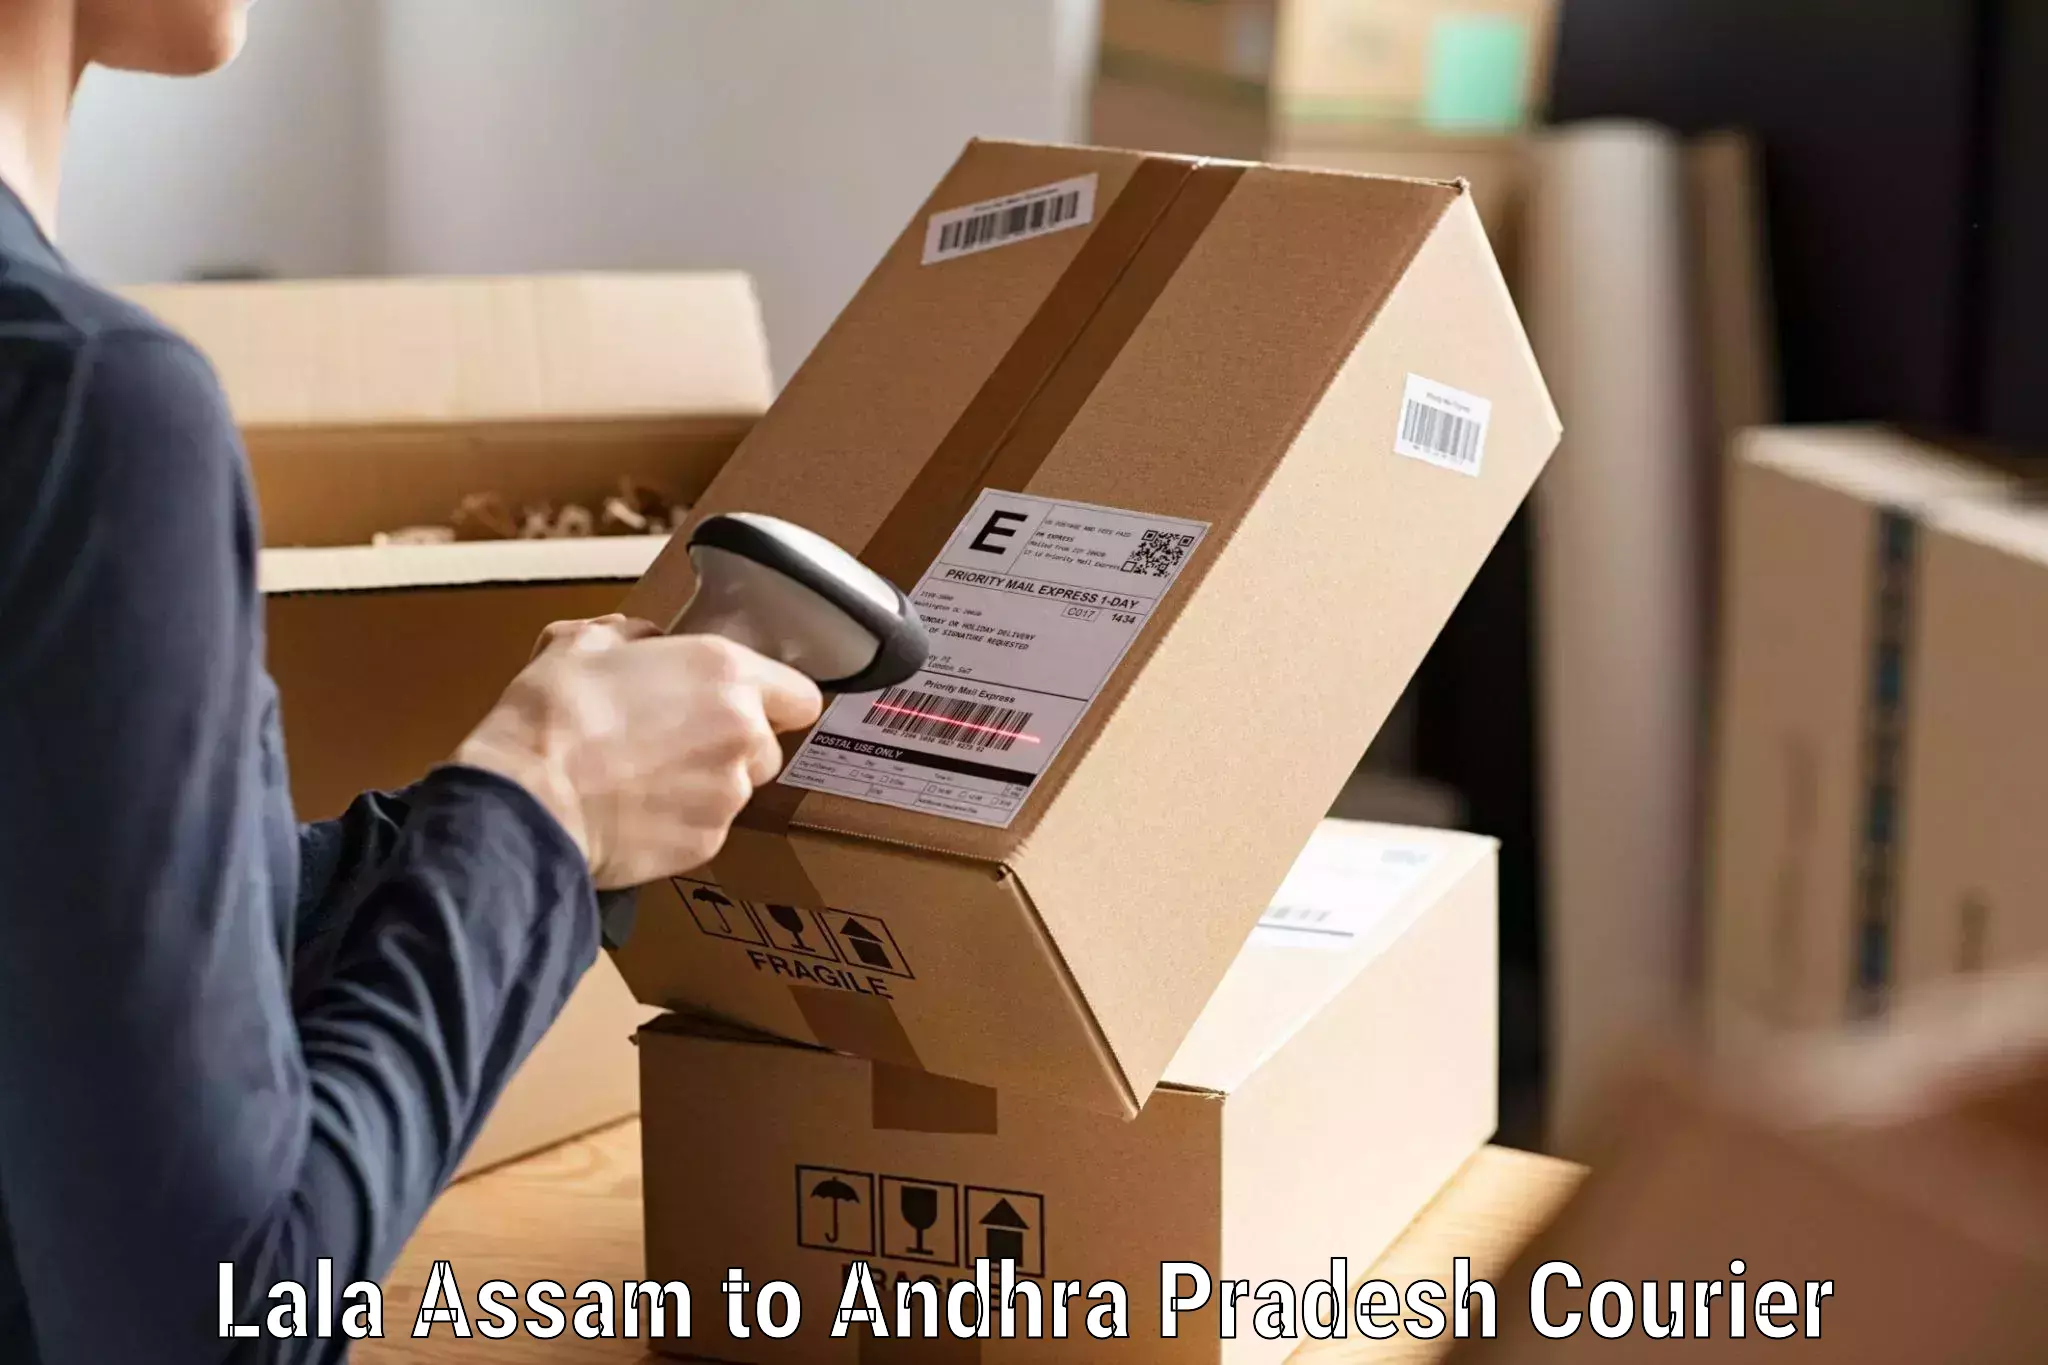 24-hour delivery options Lala Assam to Nellore